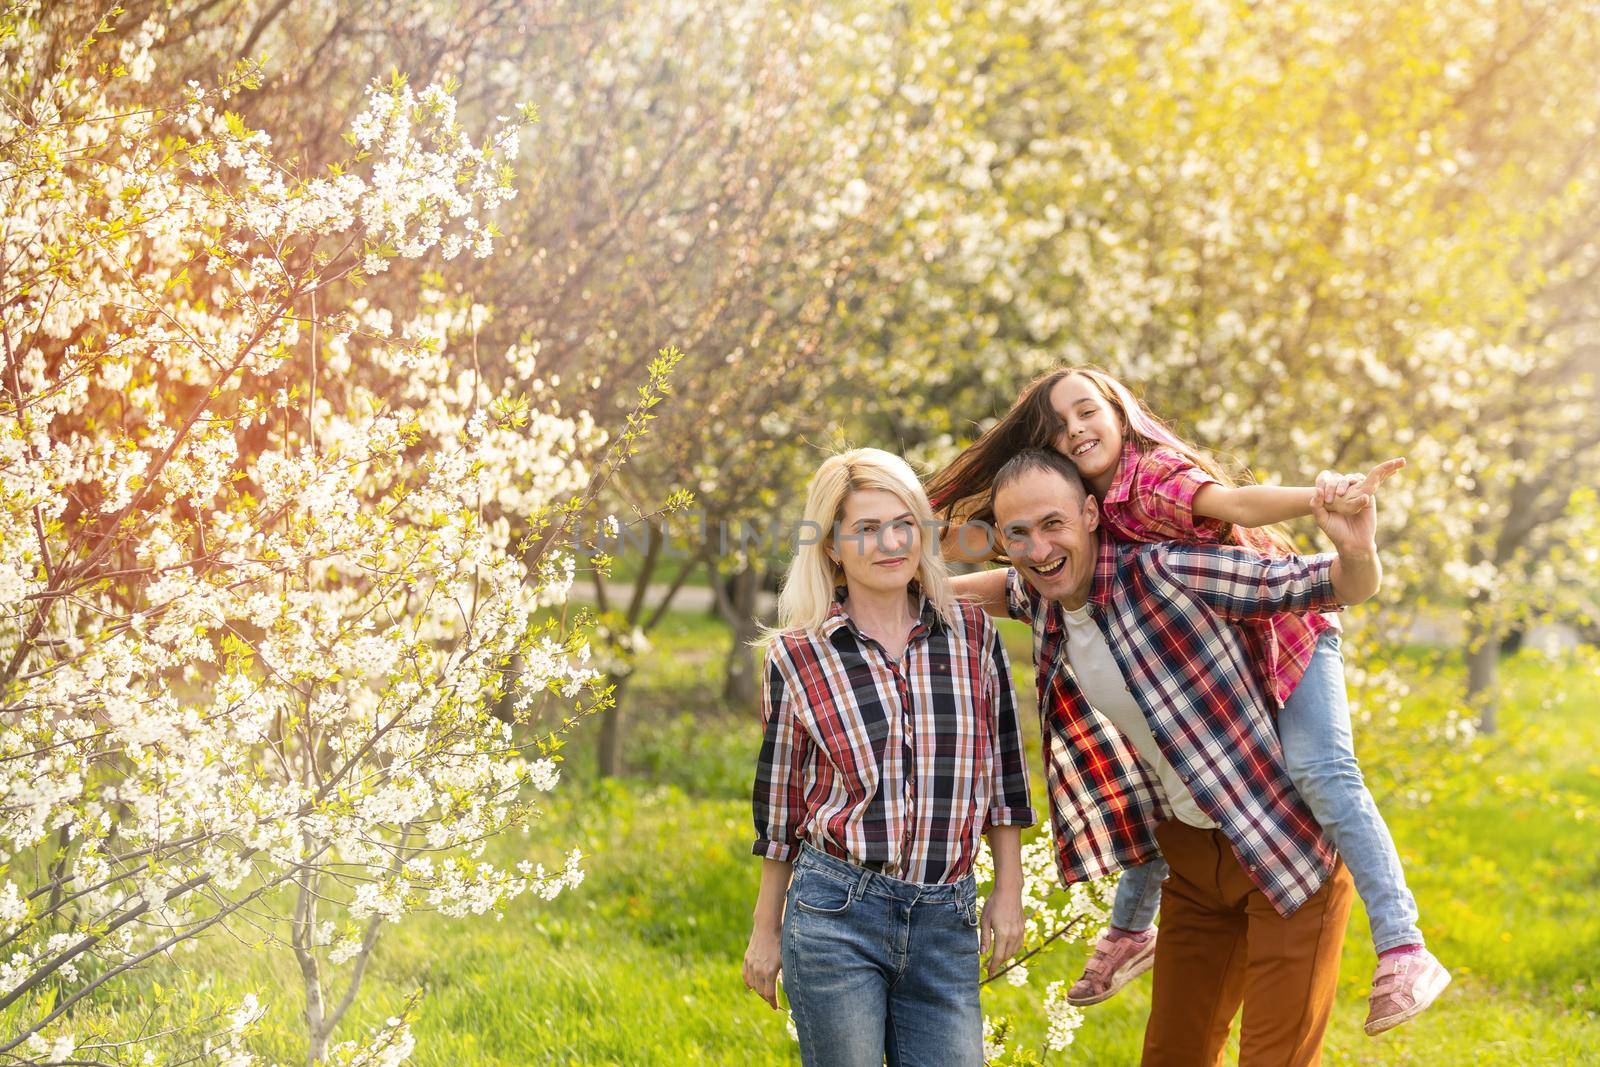 Happy family spending good time together in spring in a flowering garden.